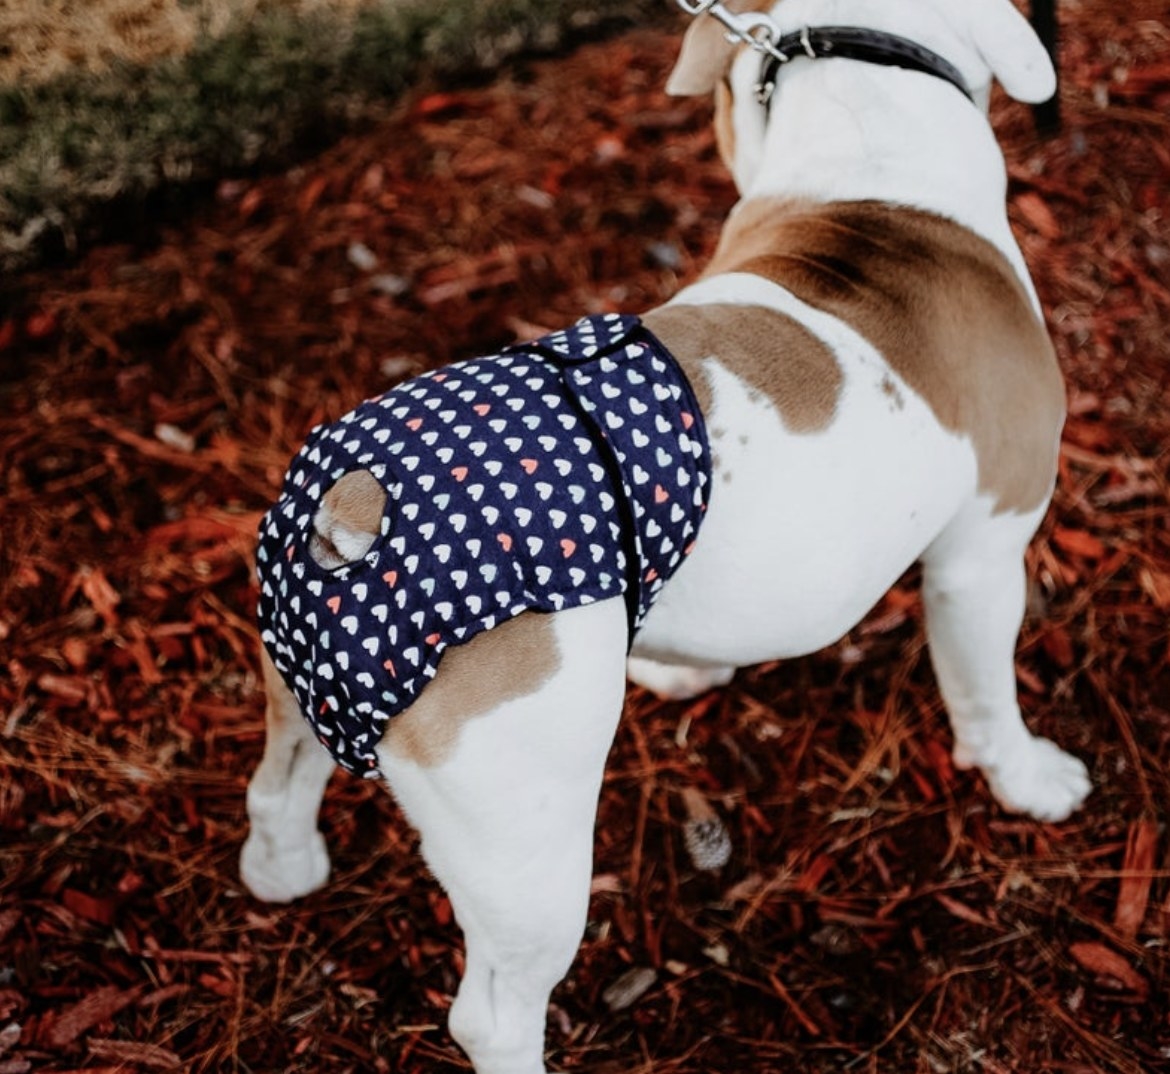 A dog wearing a heart patterned diaper